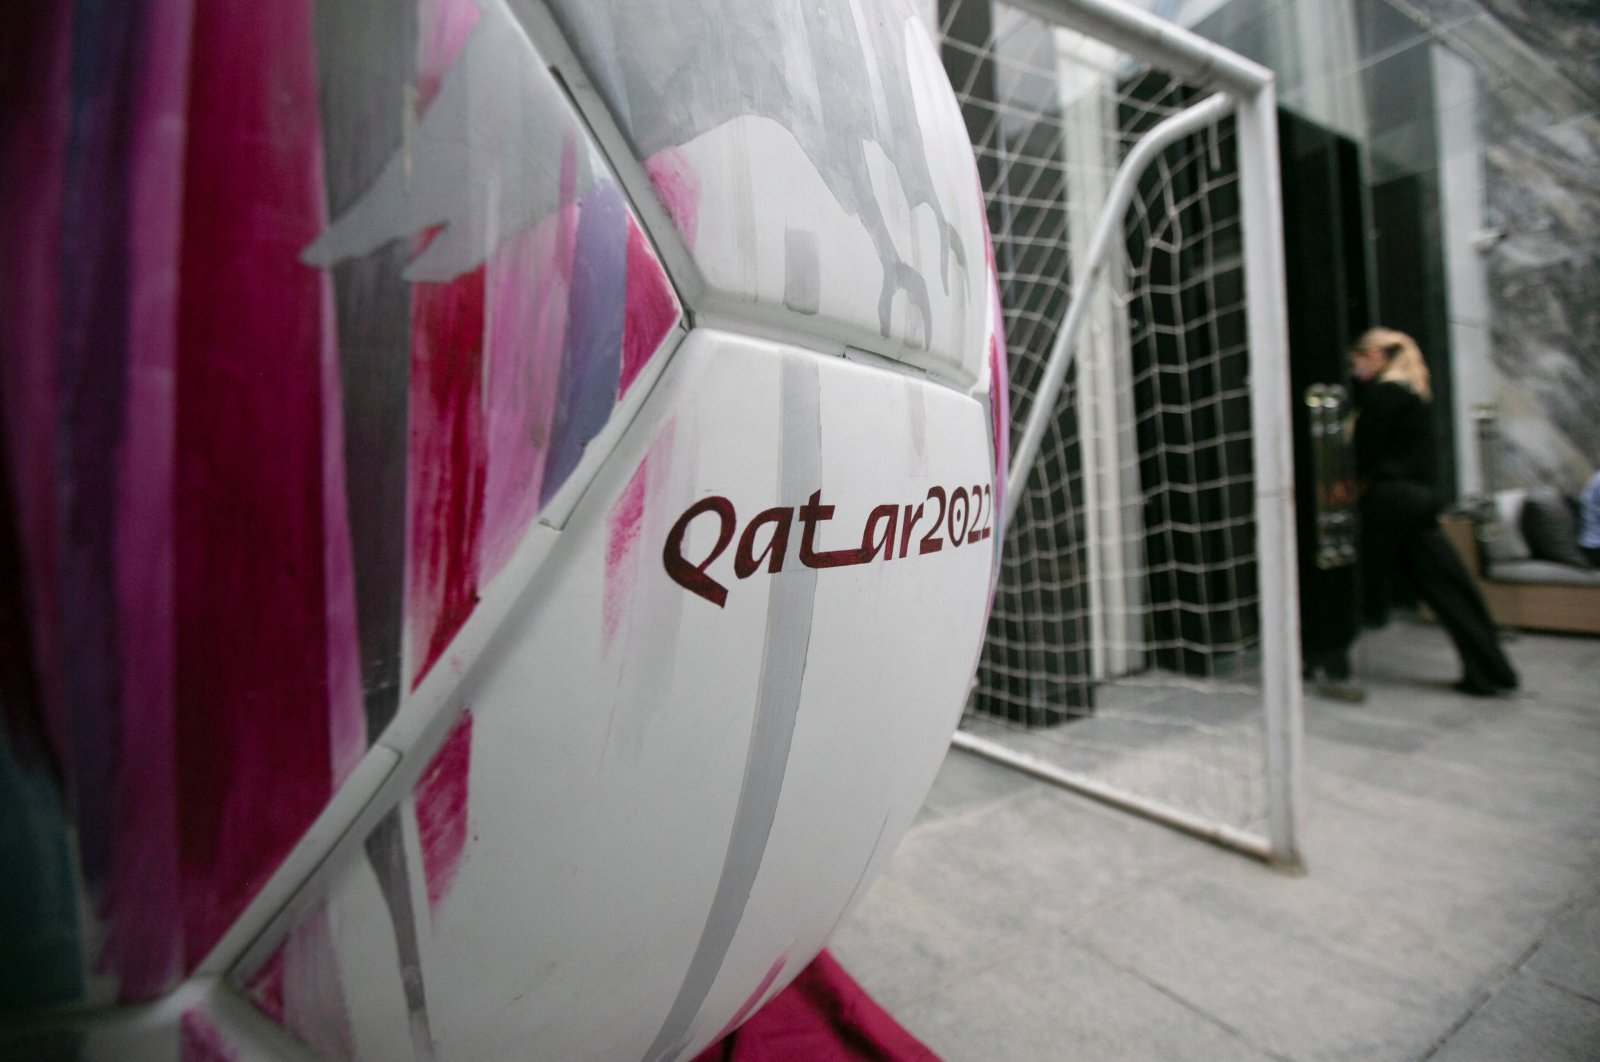 A football with the World Cup Qatar 2022 logo is pictured at the Qatar Embassy, Mexico City, Mexico, June 15, 2022. (Reuters Photo)